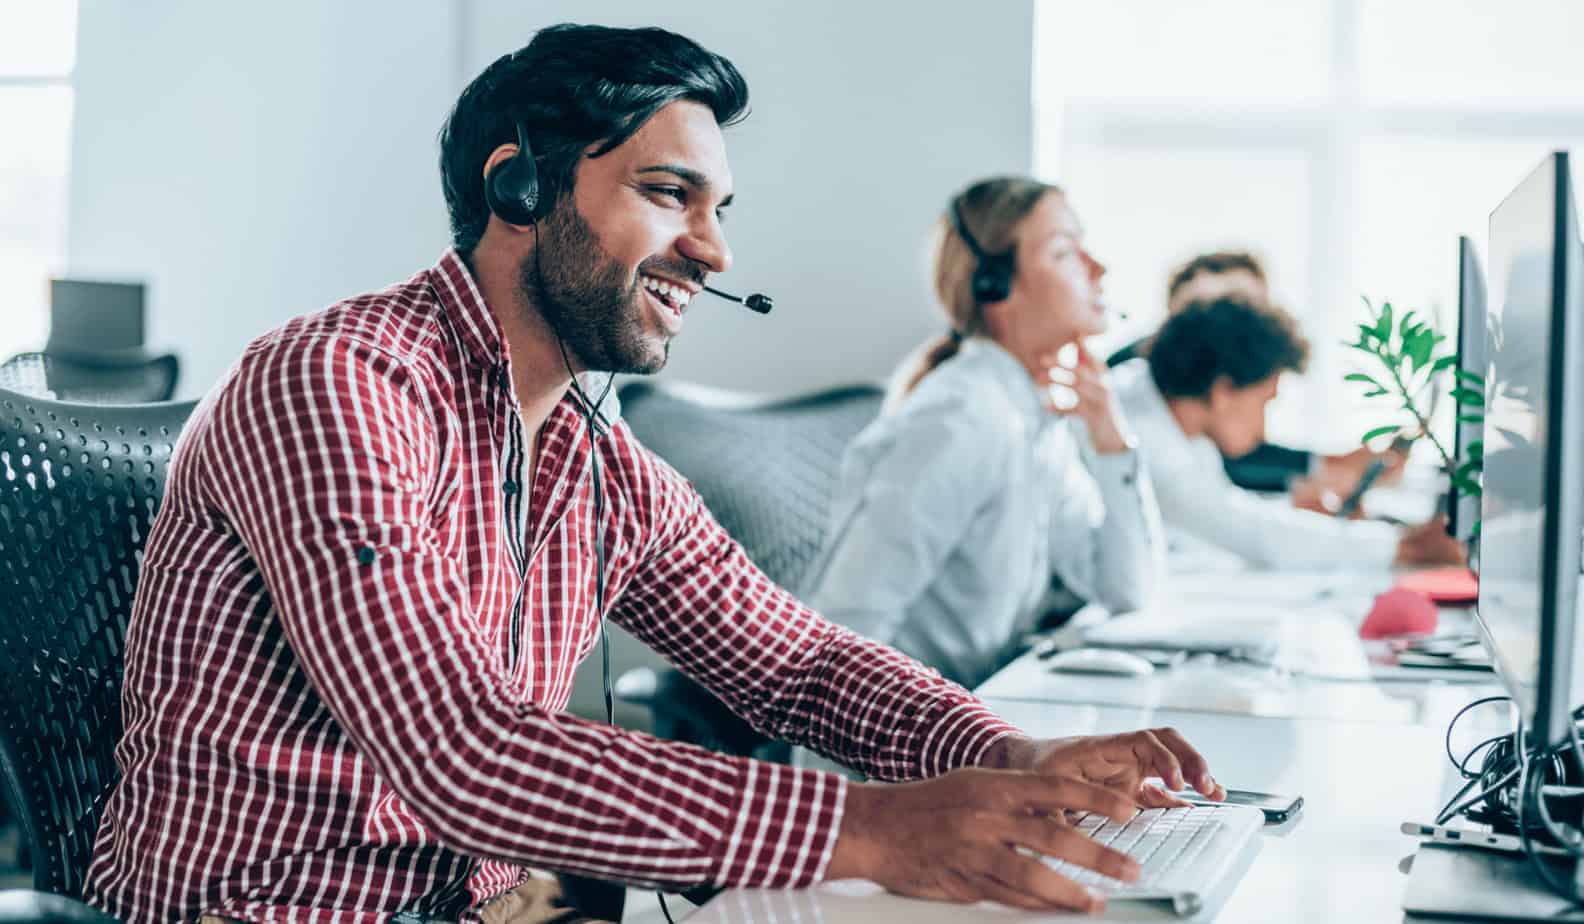 Man with headset on smiling while working on computer